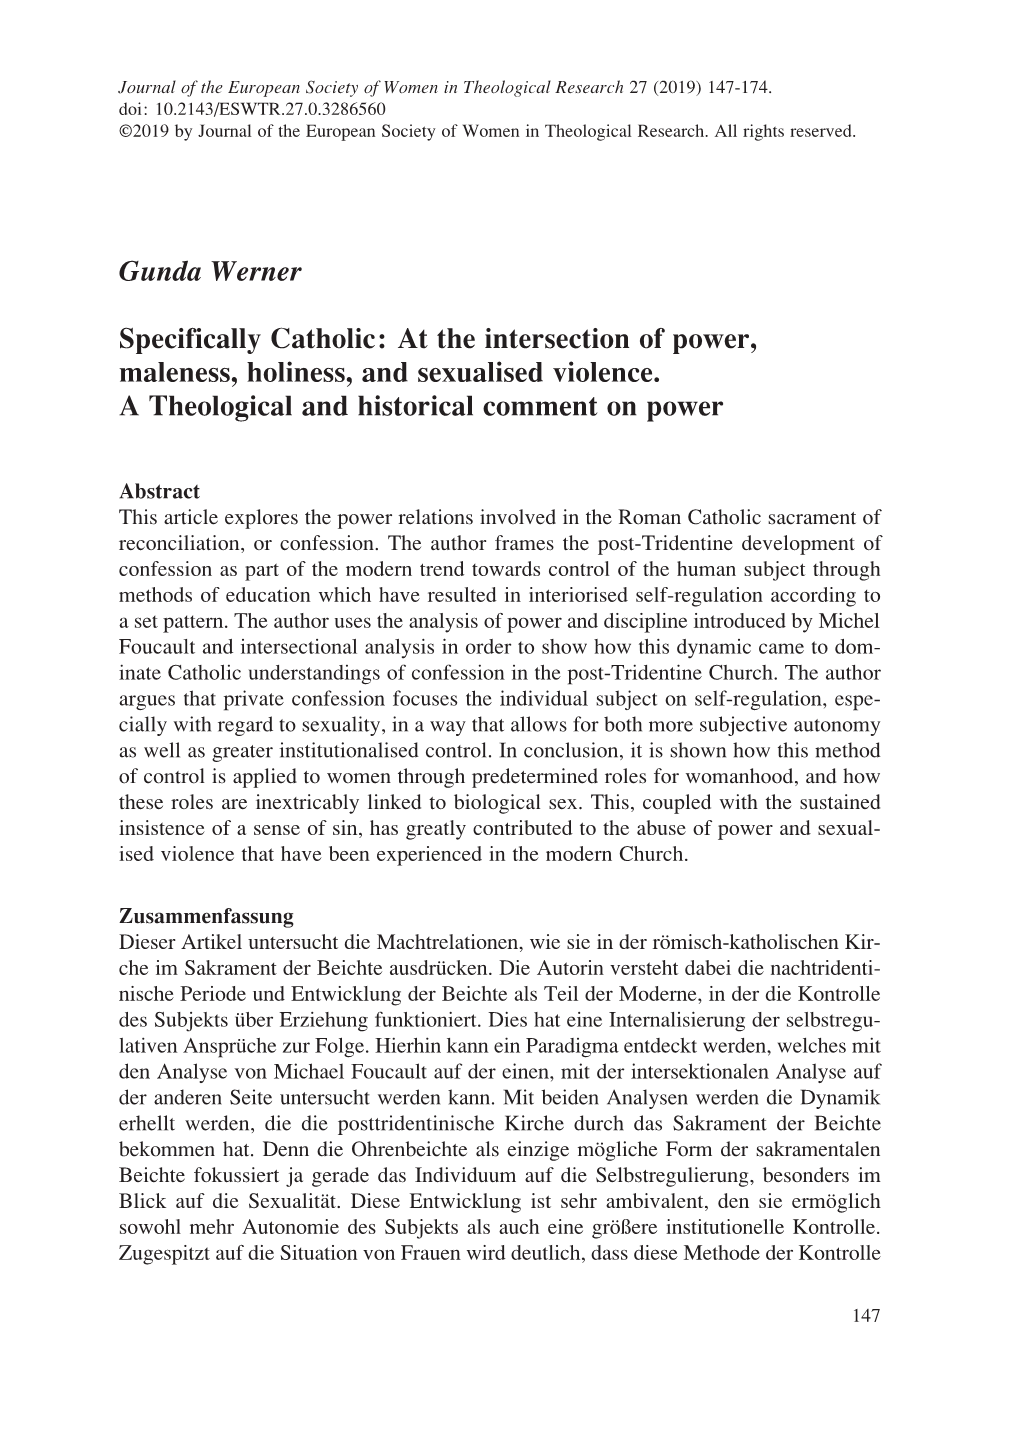 Gunda Werner Specifically Catholic: at the Intersection of Power, Maleness, Holiness, and Sexualised Violence